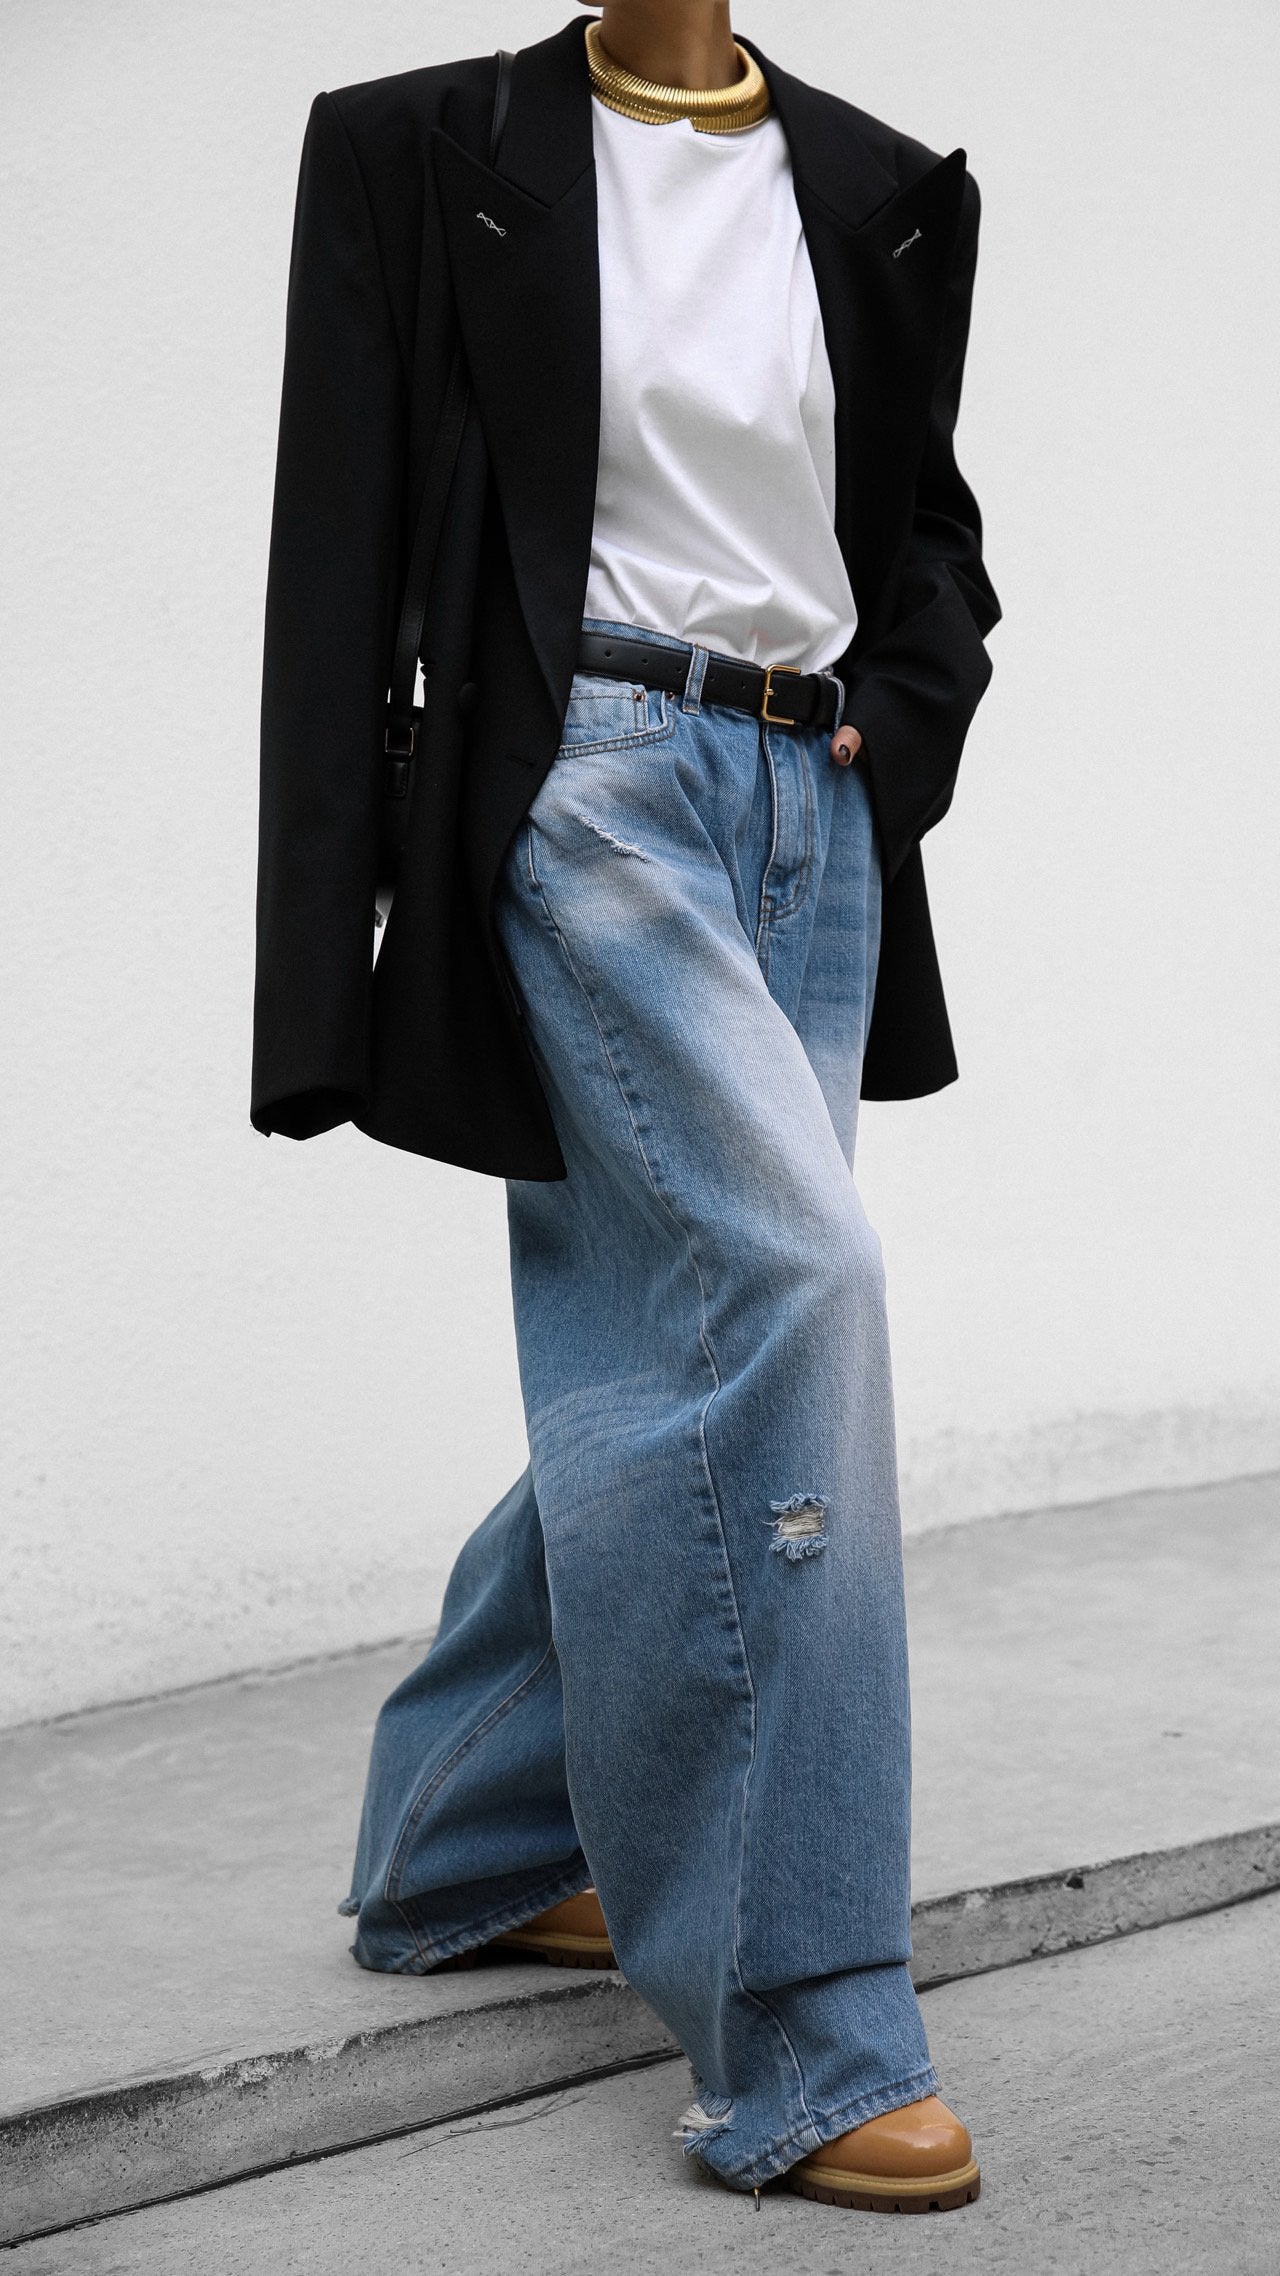 【PAPERMOON ペーパームーン】SS / Vintage Blue Distressed Damage Wash Wide-Leg Jeans